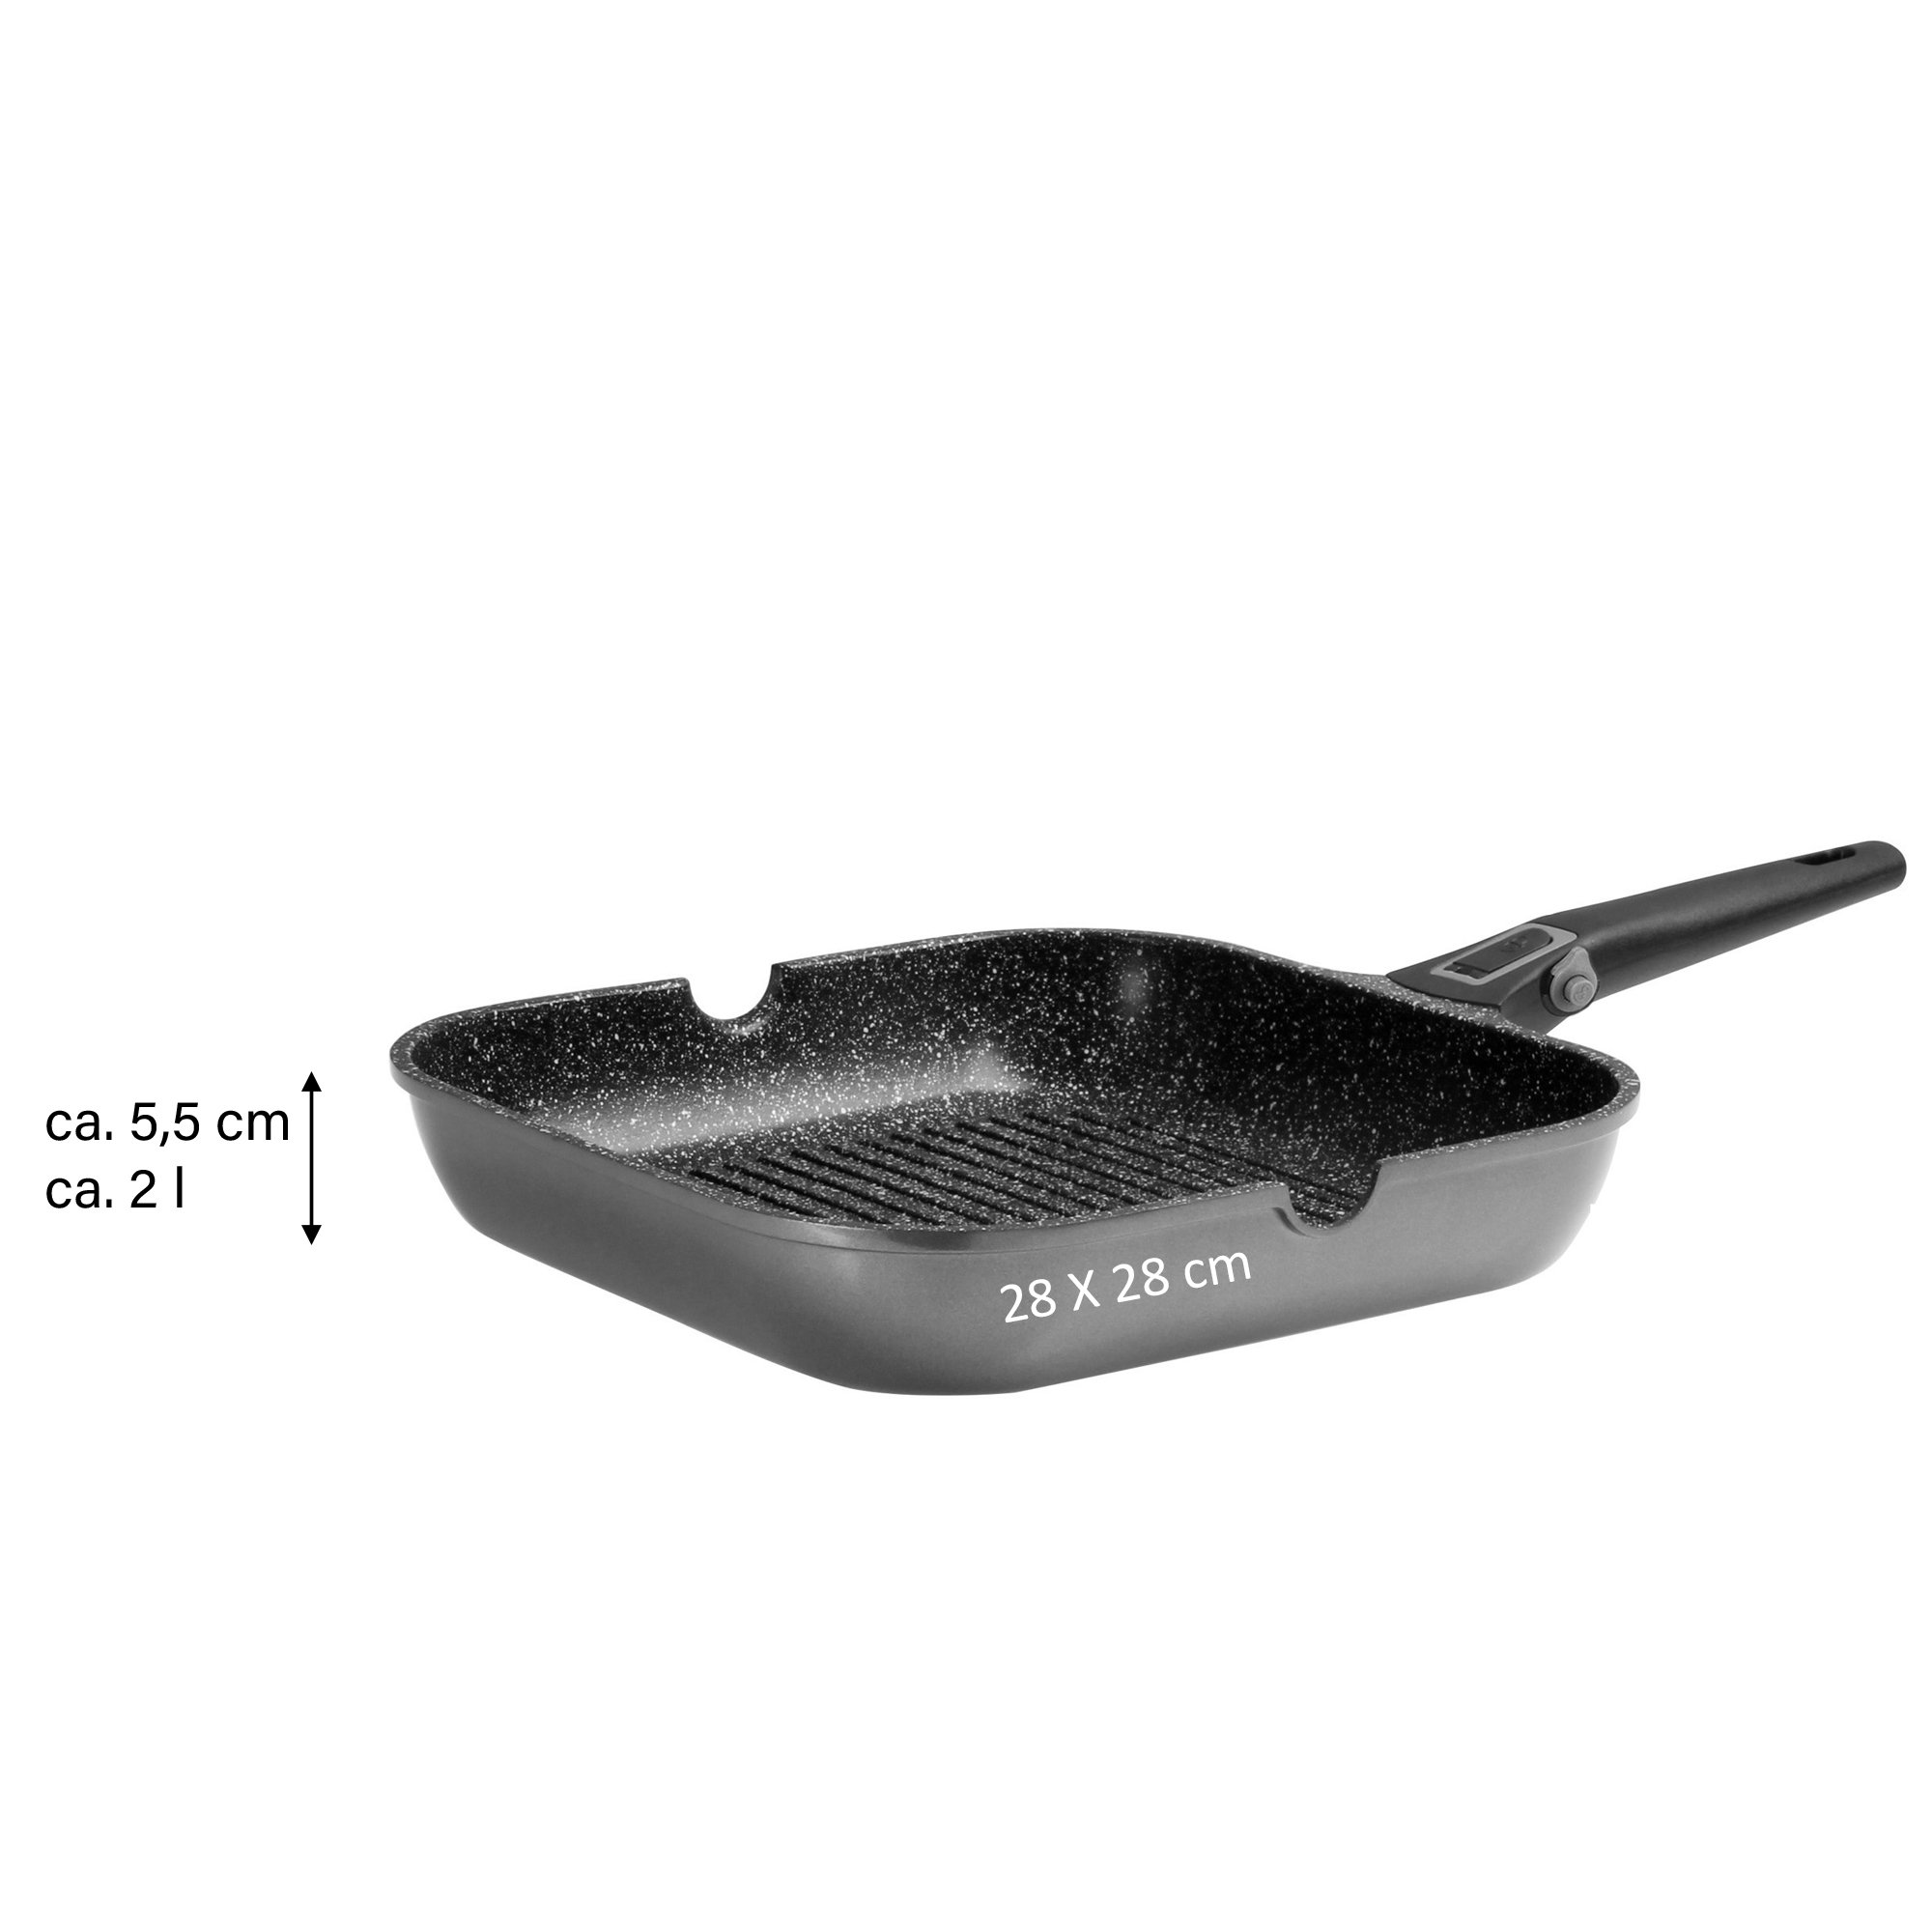 STONELINE® Imagination PLUS grill pan 28 x 28 cm, with removable handle, with 2 spouts, oven-safe